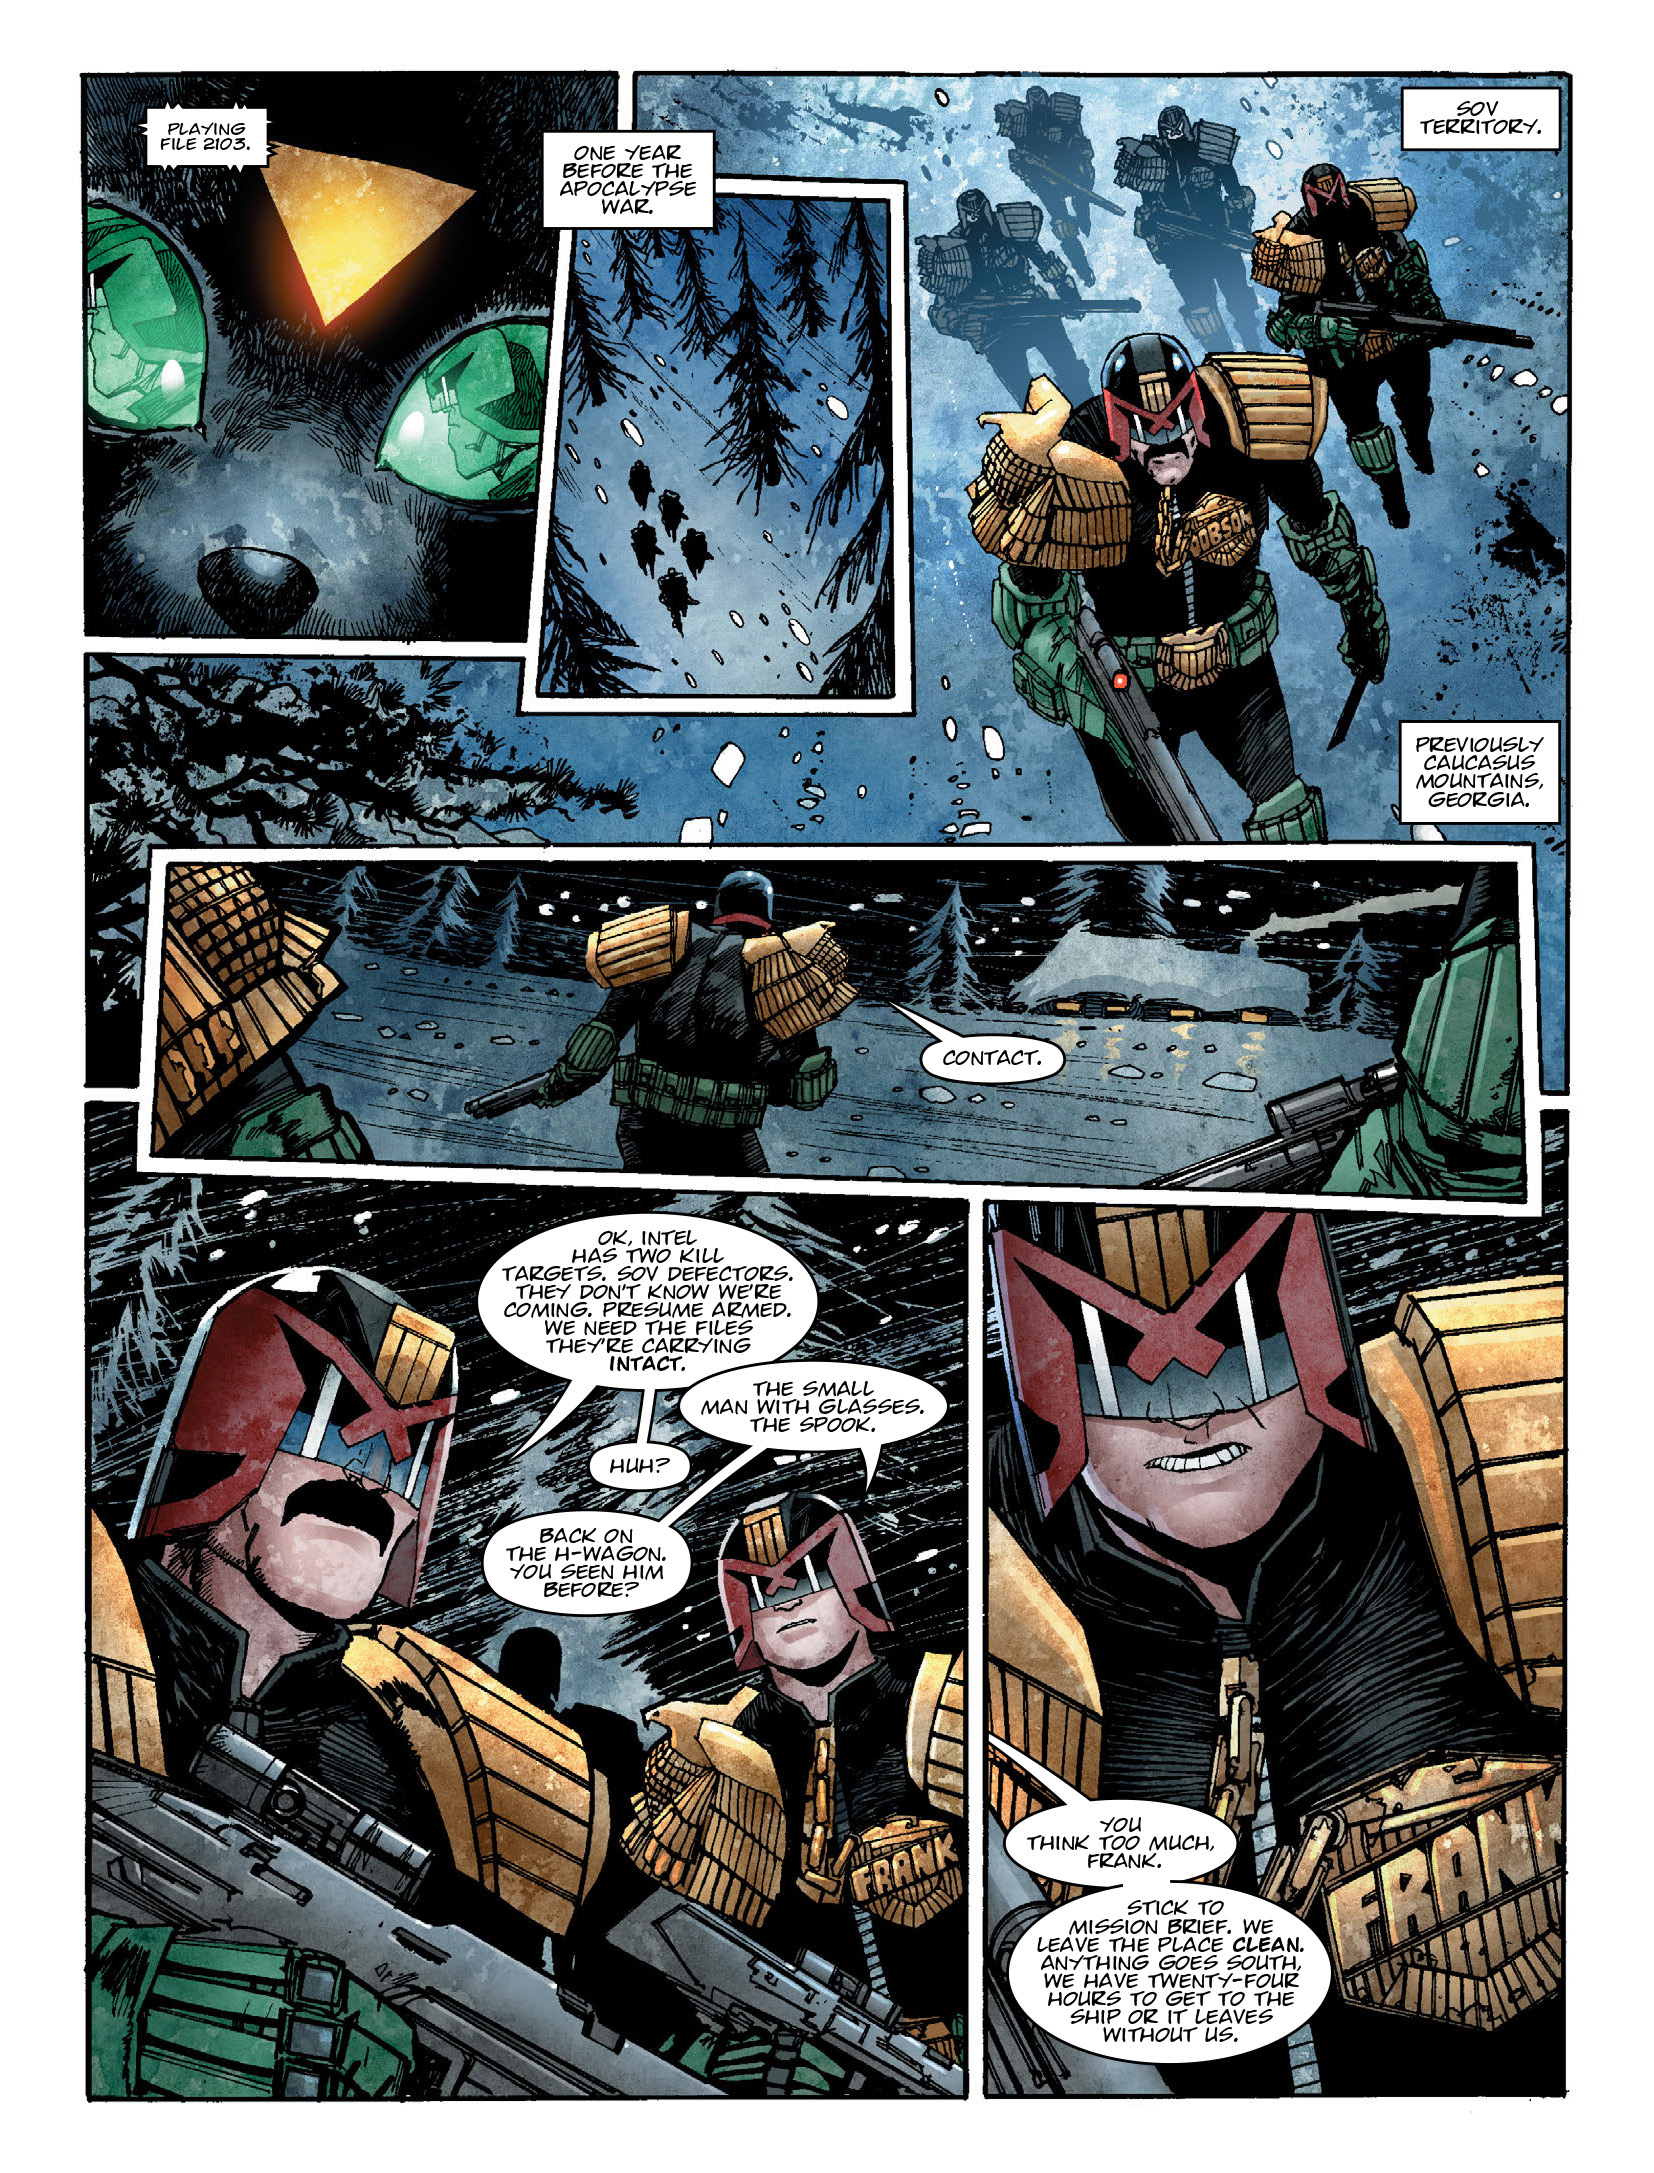 2000 AD: Chapter 2107 - Page 4